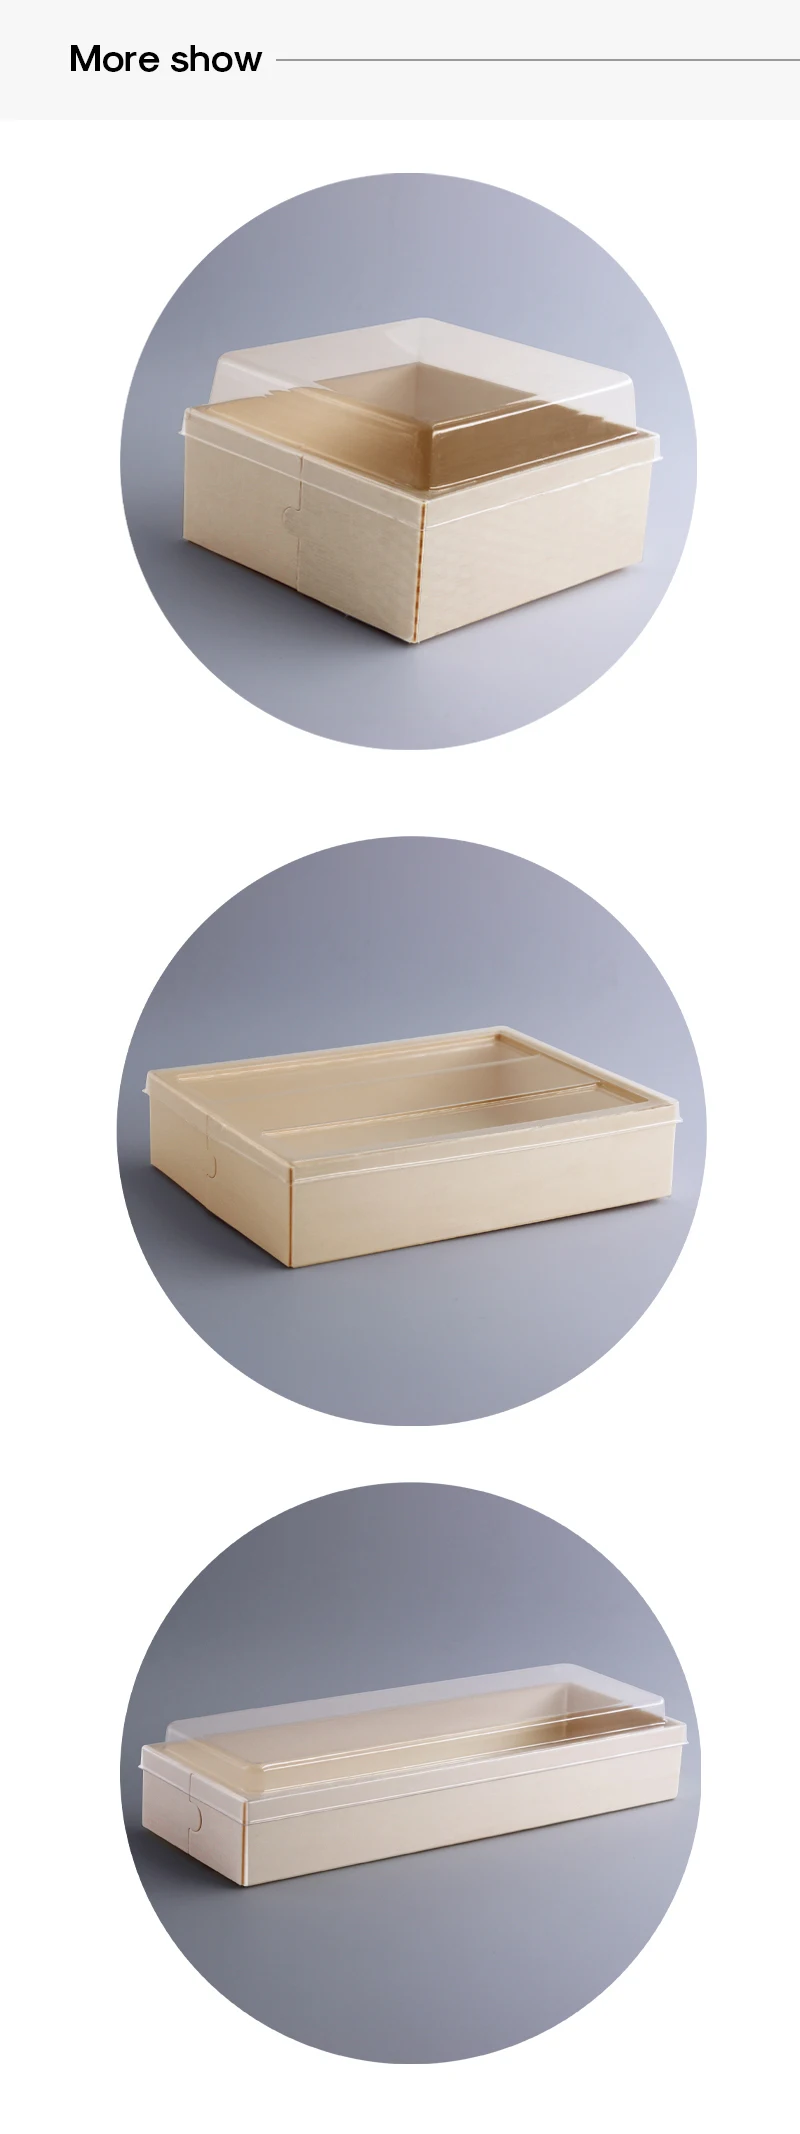 Wholesale Biodegradable Wooden Catering Bakery Pastry Box Packaging With Clear Display Window Donut Mini Cake